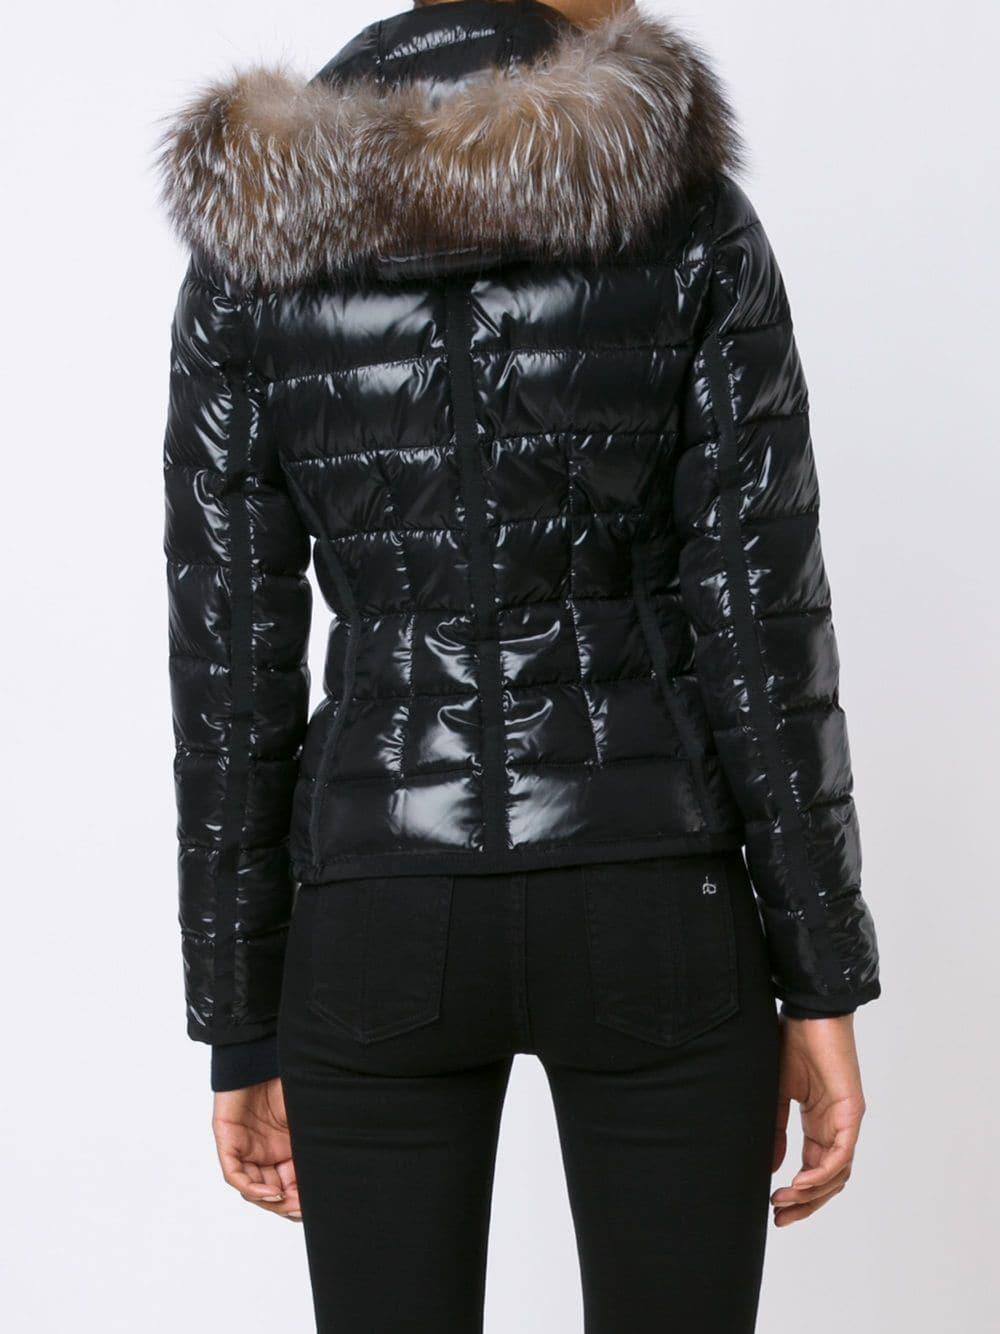 Moncler 'armoise' Padded Jacket in Black - Lyst